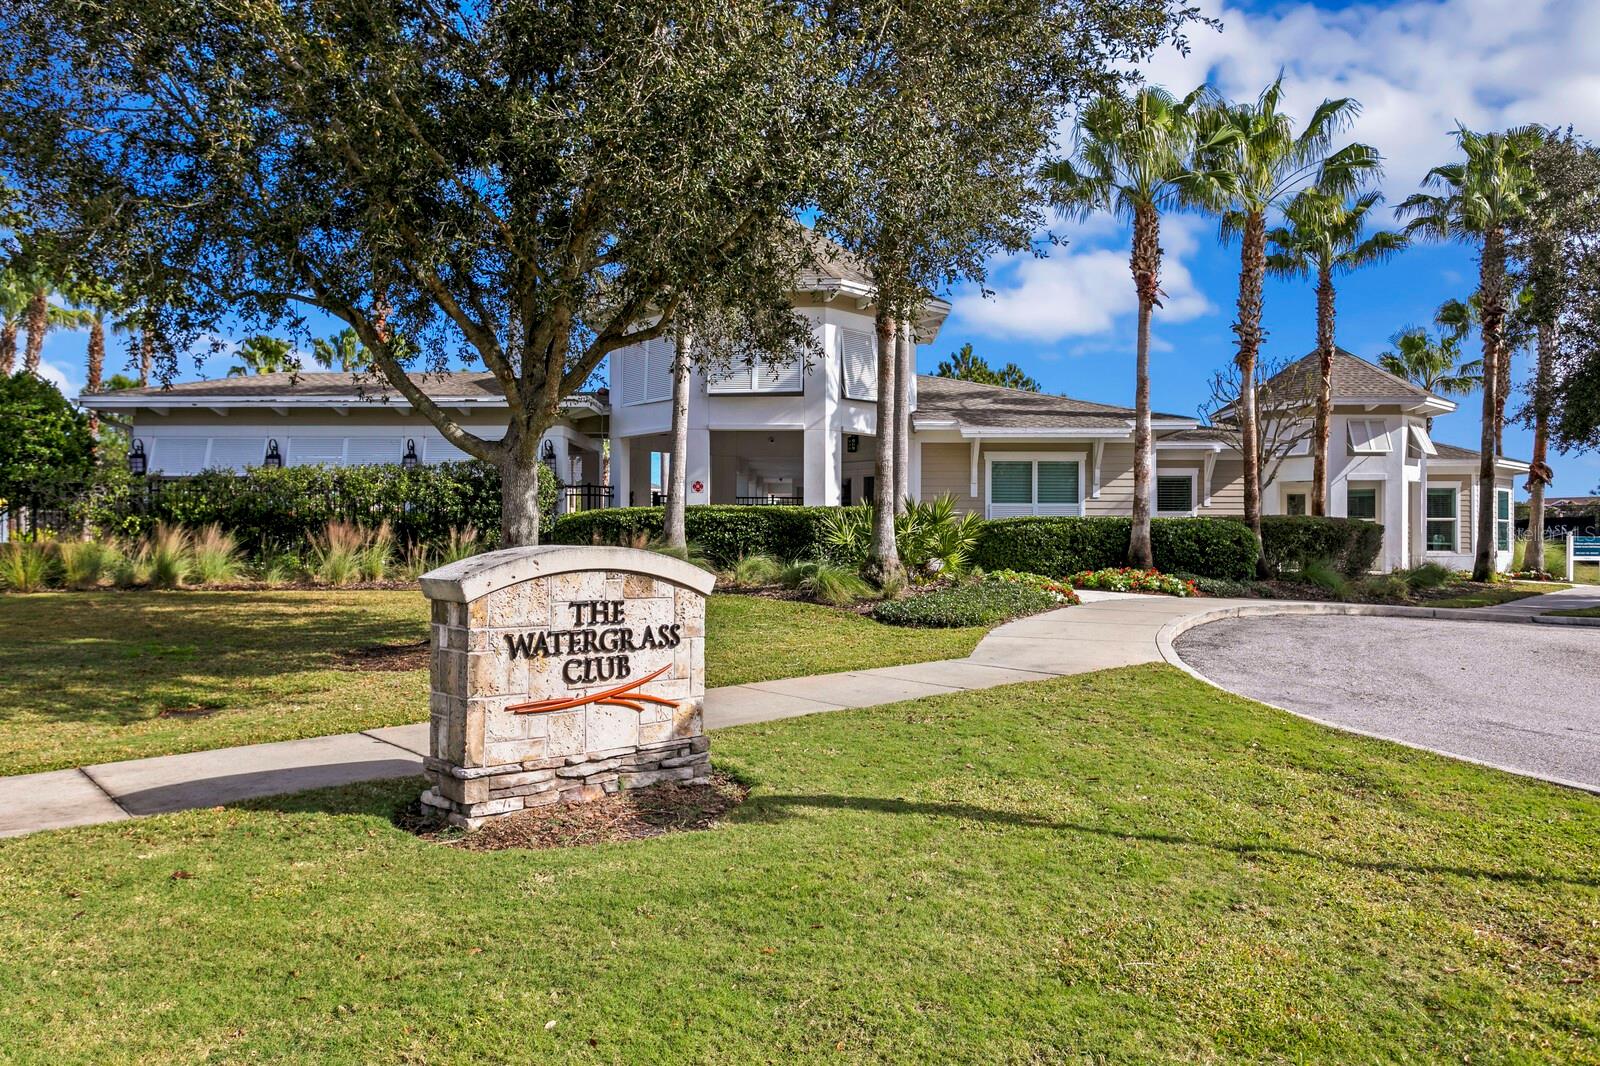 The Watergrass Club is home to our community events & foodtrucks as well as amenities.